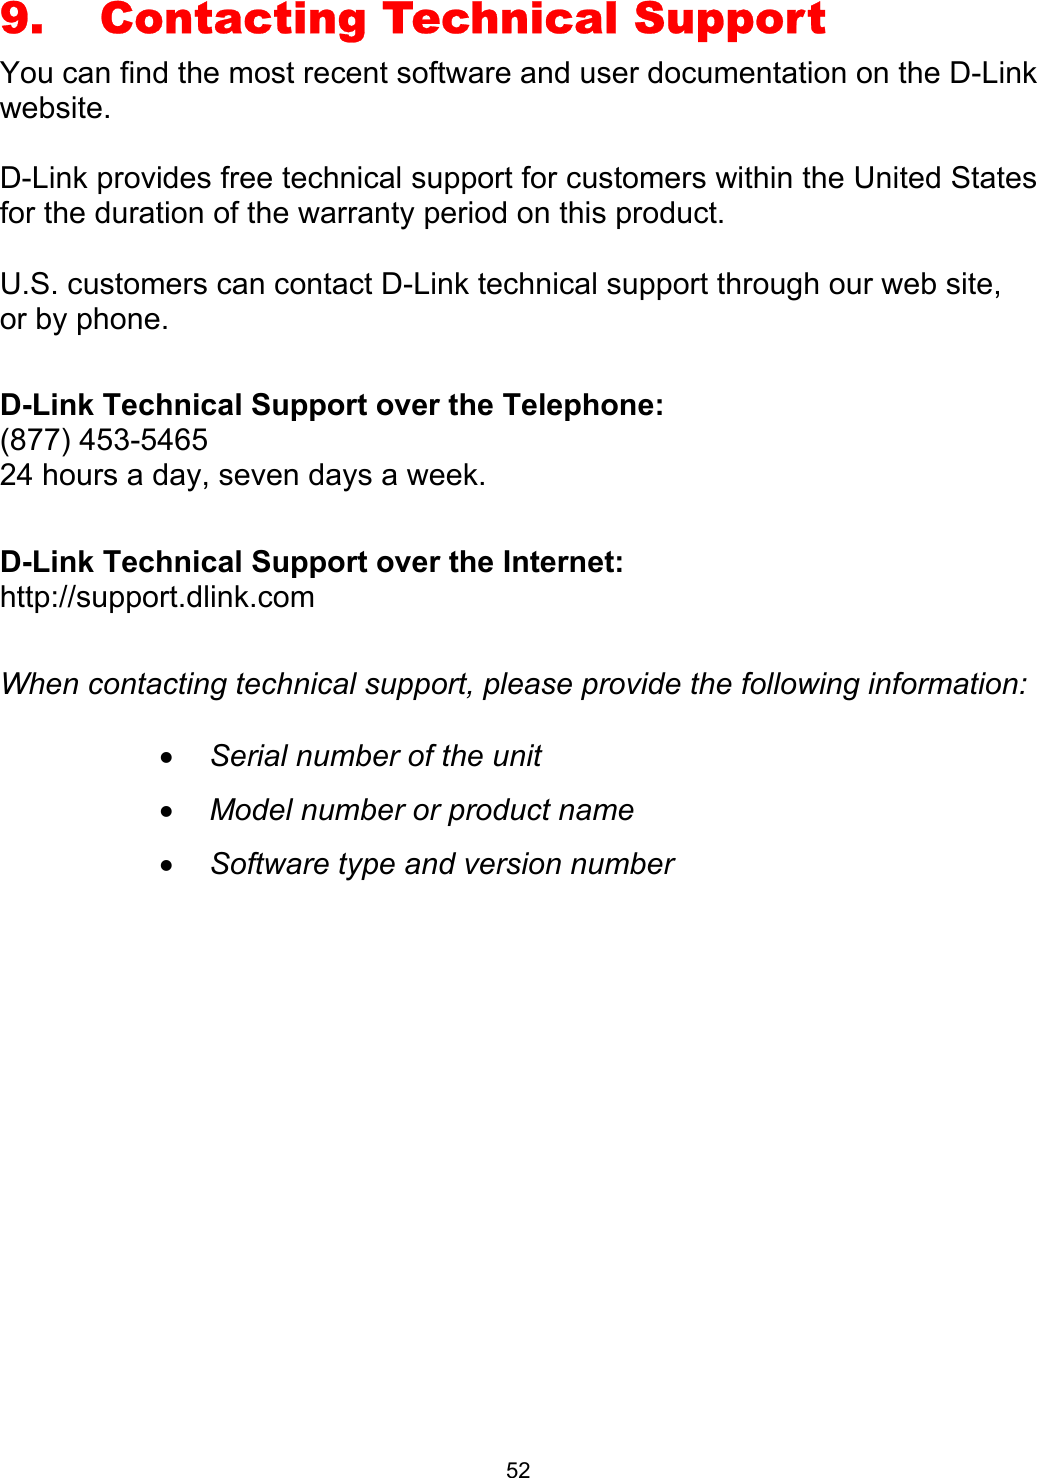  529.    Contacting Technical Support You can find the most recent software and user documentation on the D-Link website.  D-Link provides free technical support for customers within the United States for the duration of the warranty period on this product.    U.S. customers can contact D-Link technical support through our web site, or by phone.    D-Link Technical Support over the Telephone: (877) 453-5465 24 hours a day, seven days a week.  D-Link Technical Support over the Internet: http://support.dlink.com  When contacting technical support, please provide the following information:  •  Serial number of the unit •  Model number or product name •  Software type and version number              